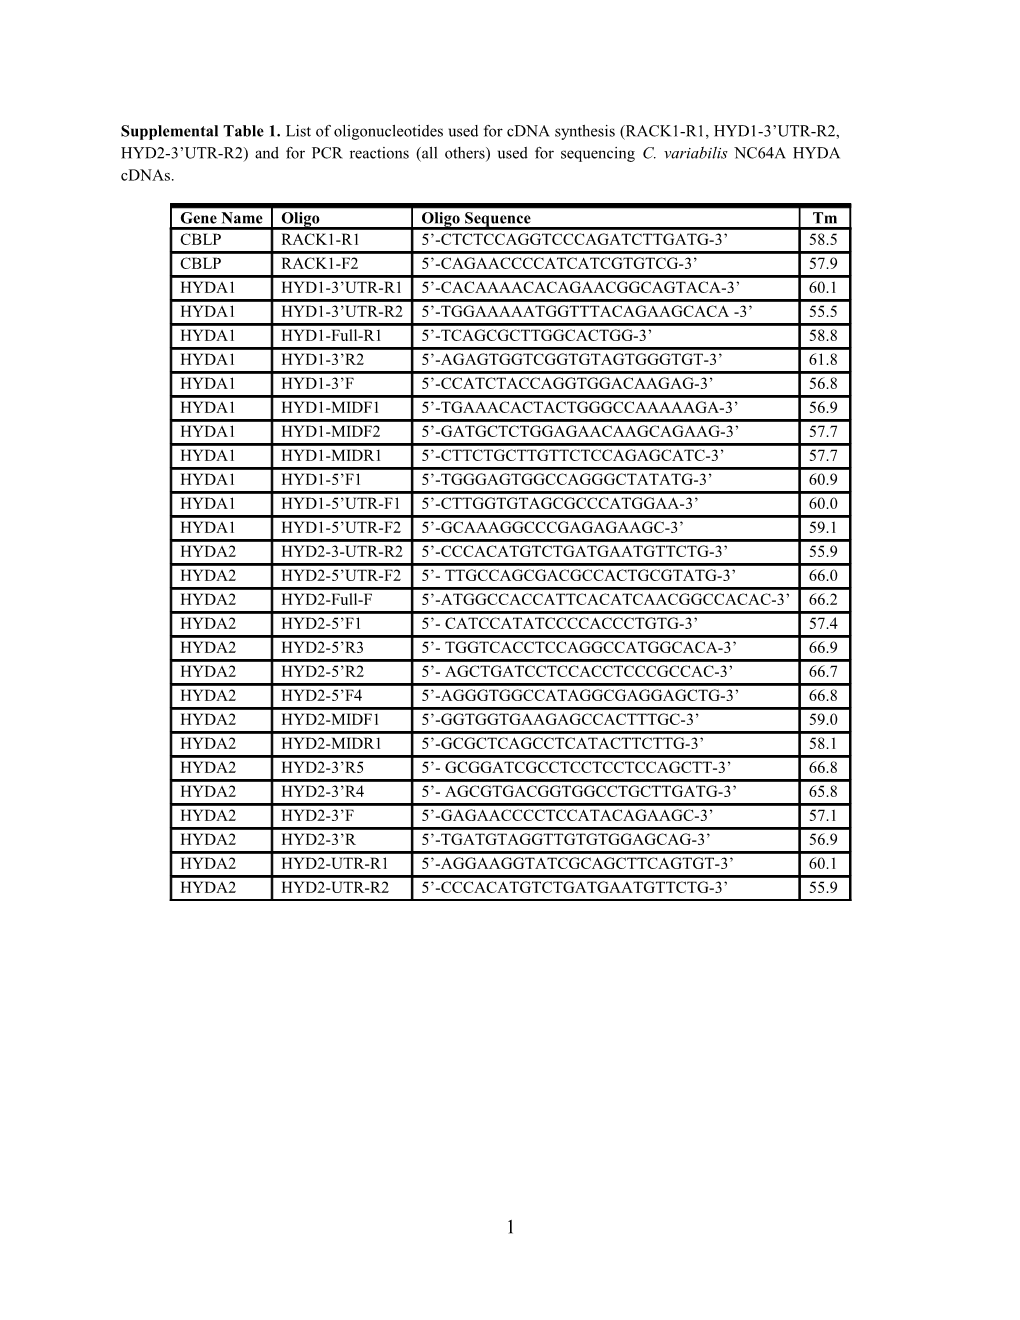 Supplemental Table 1. List of Oligonucleotides Used for Cdna Synthesis (RACK1-R1, HYD1-3